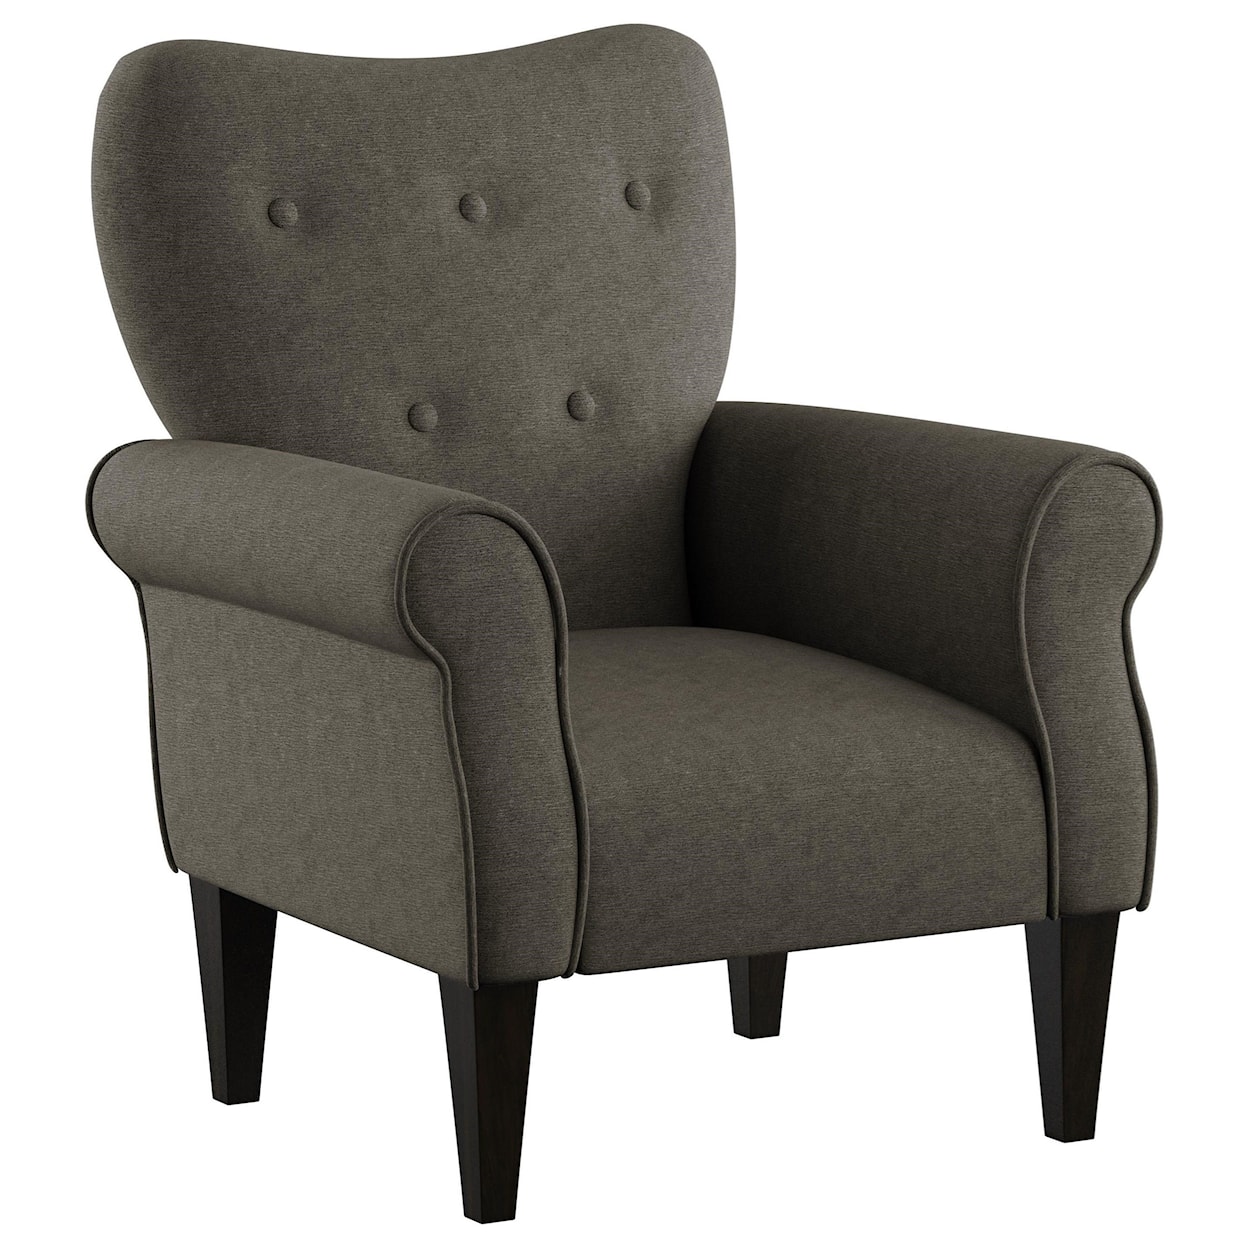 Emerald Lydia Upholstered Chair